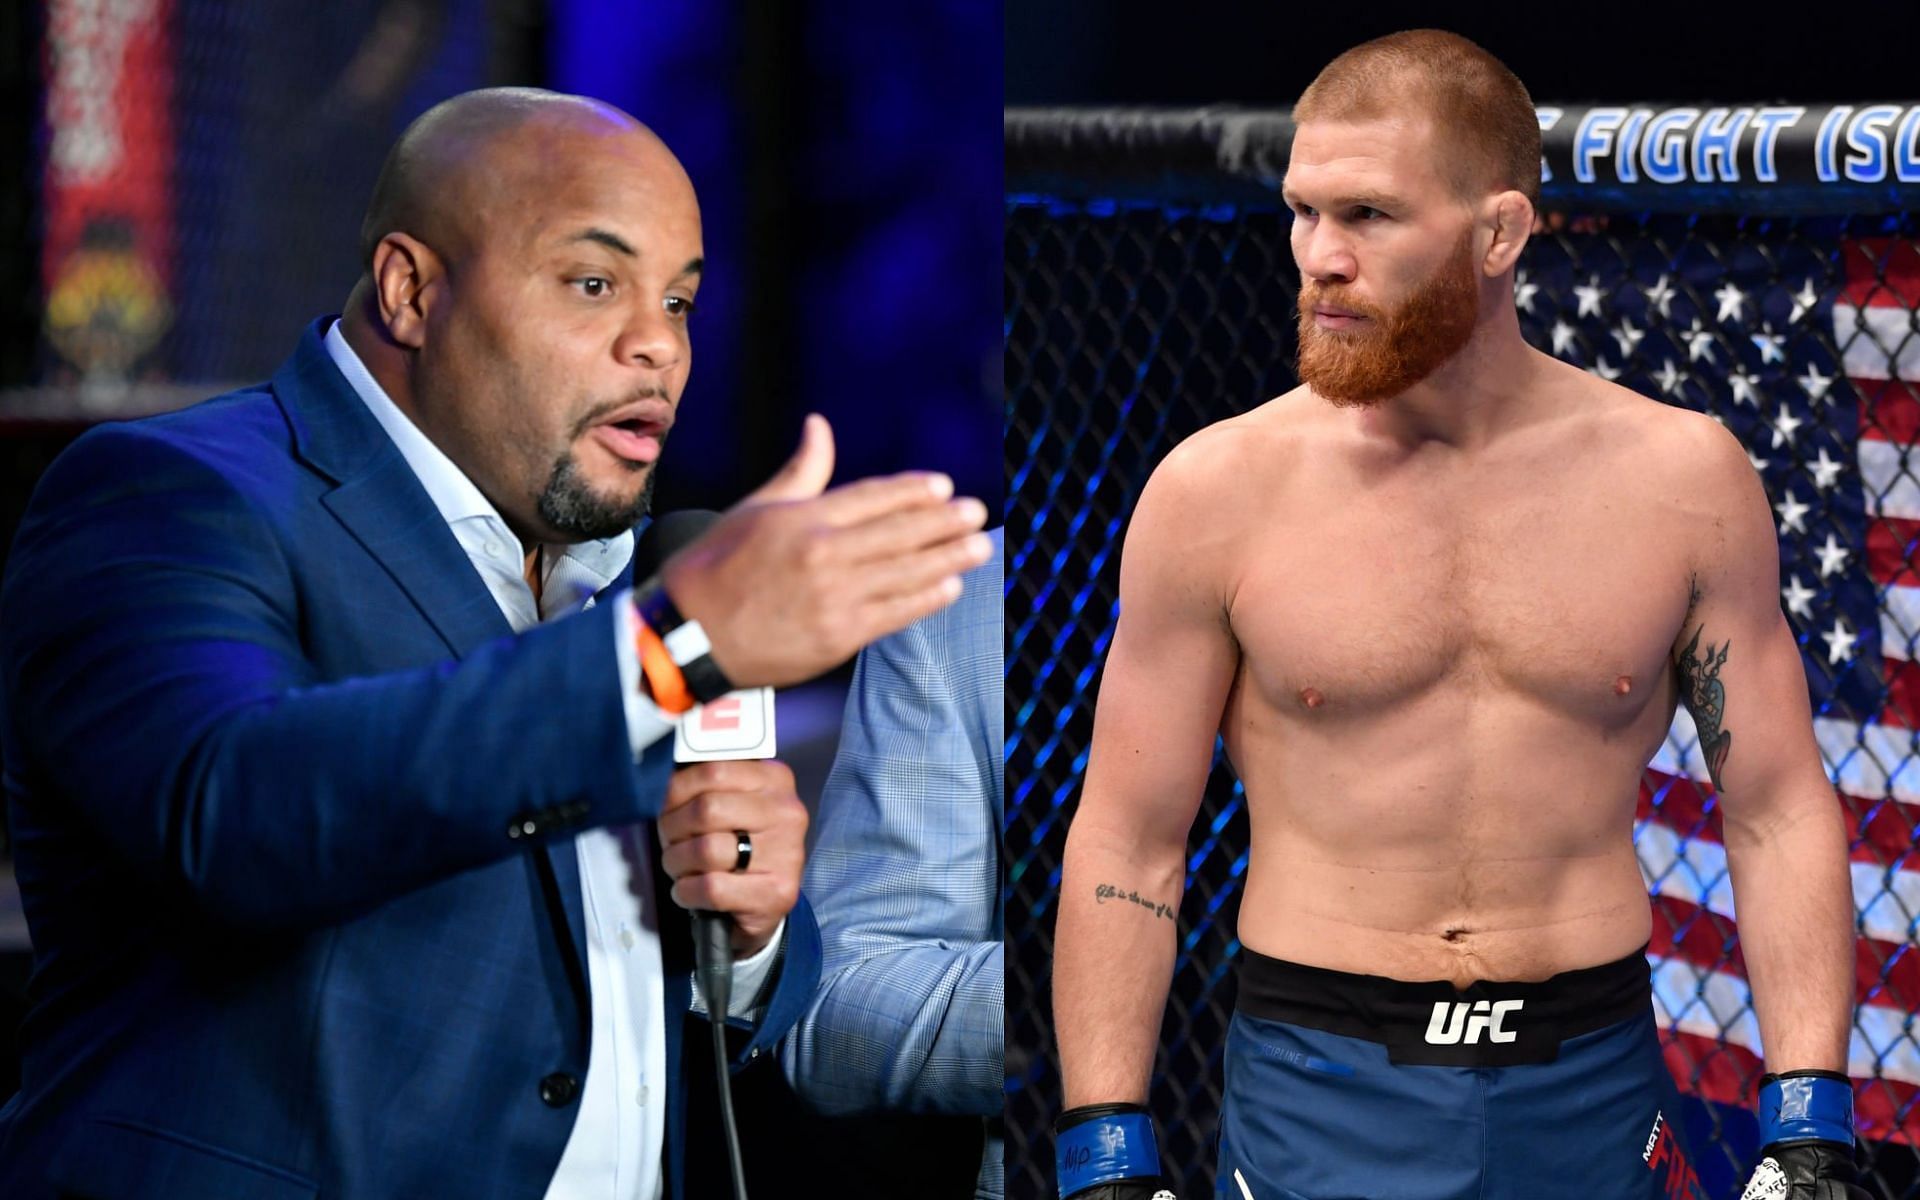 Daniel Cormier (left) and Matt Frevola (right) [Images Courtesy: @GettyImages]